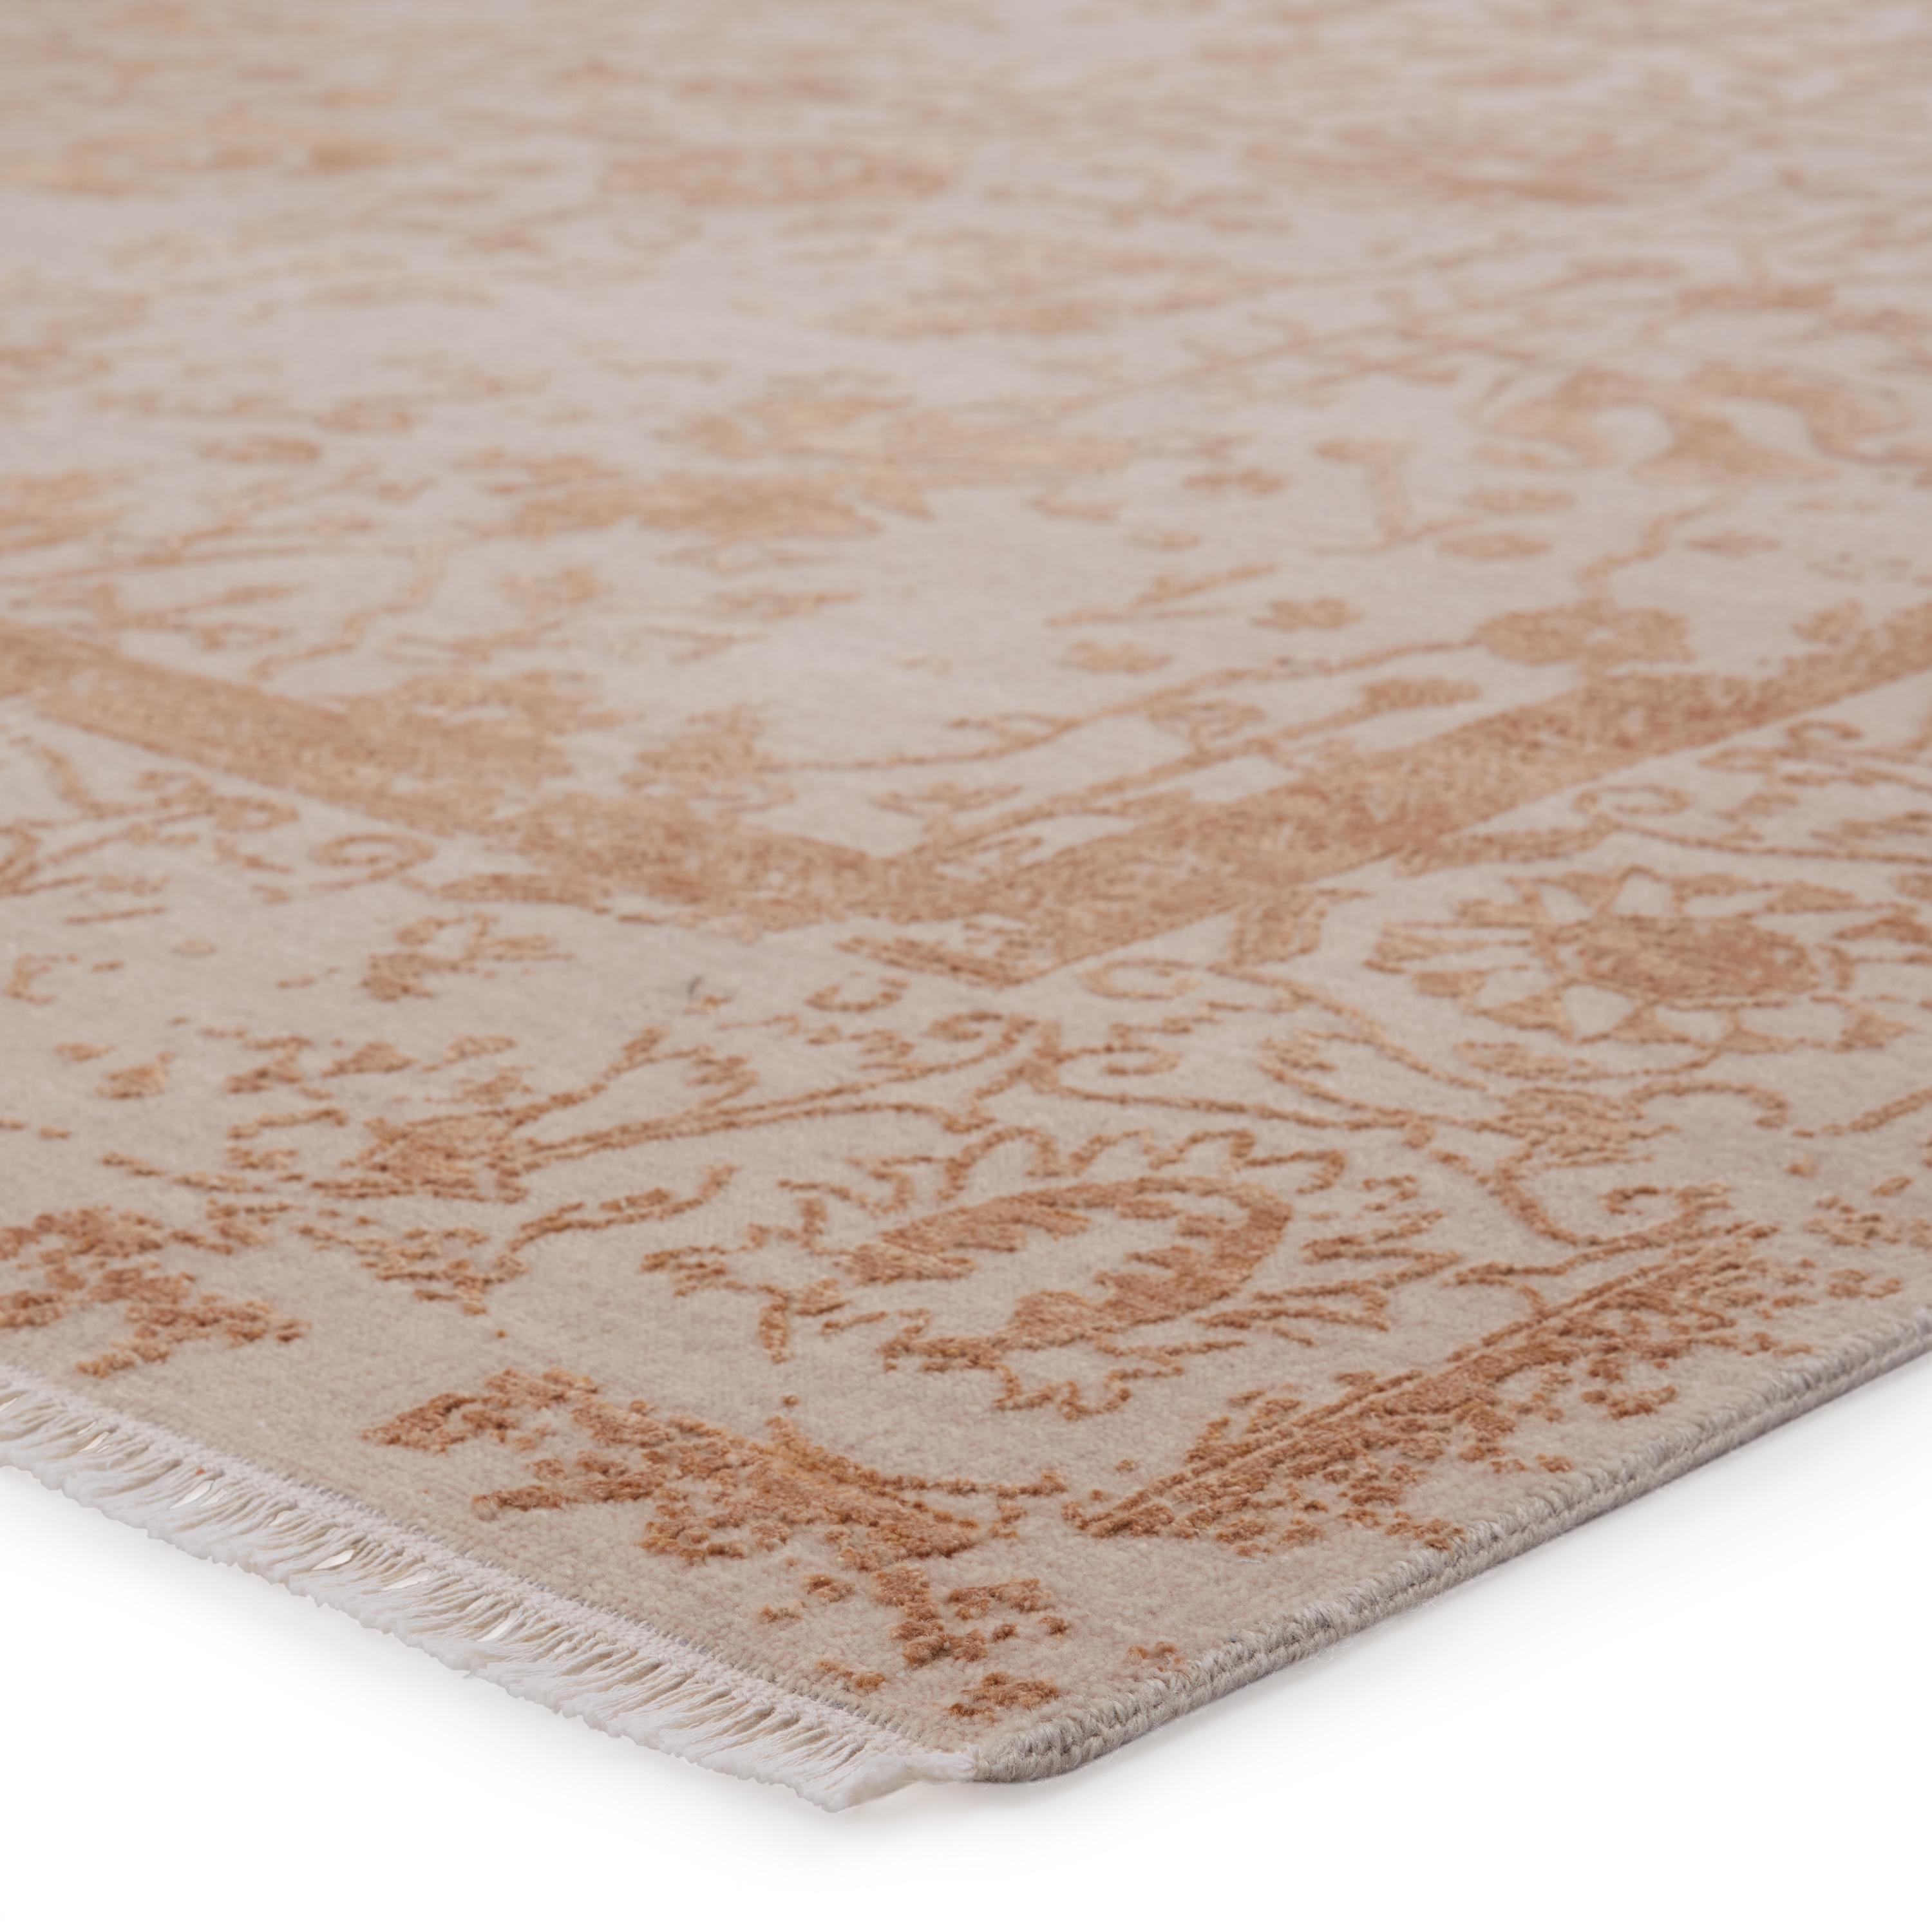 Minett Hand-Knotted Floral Gold/ Light Gray Area Rug (9'X12') - Image 1